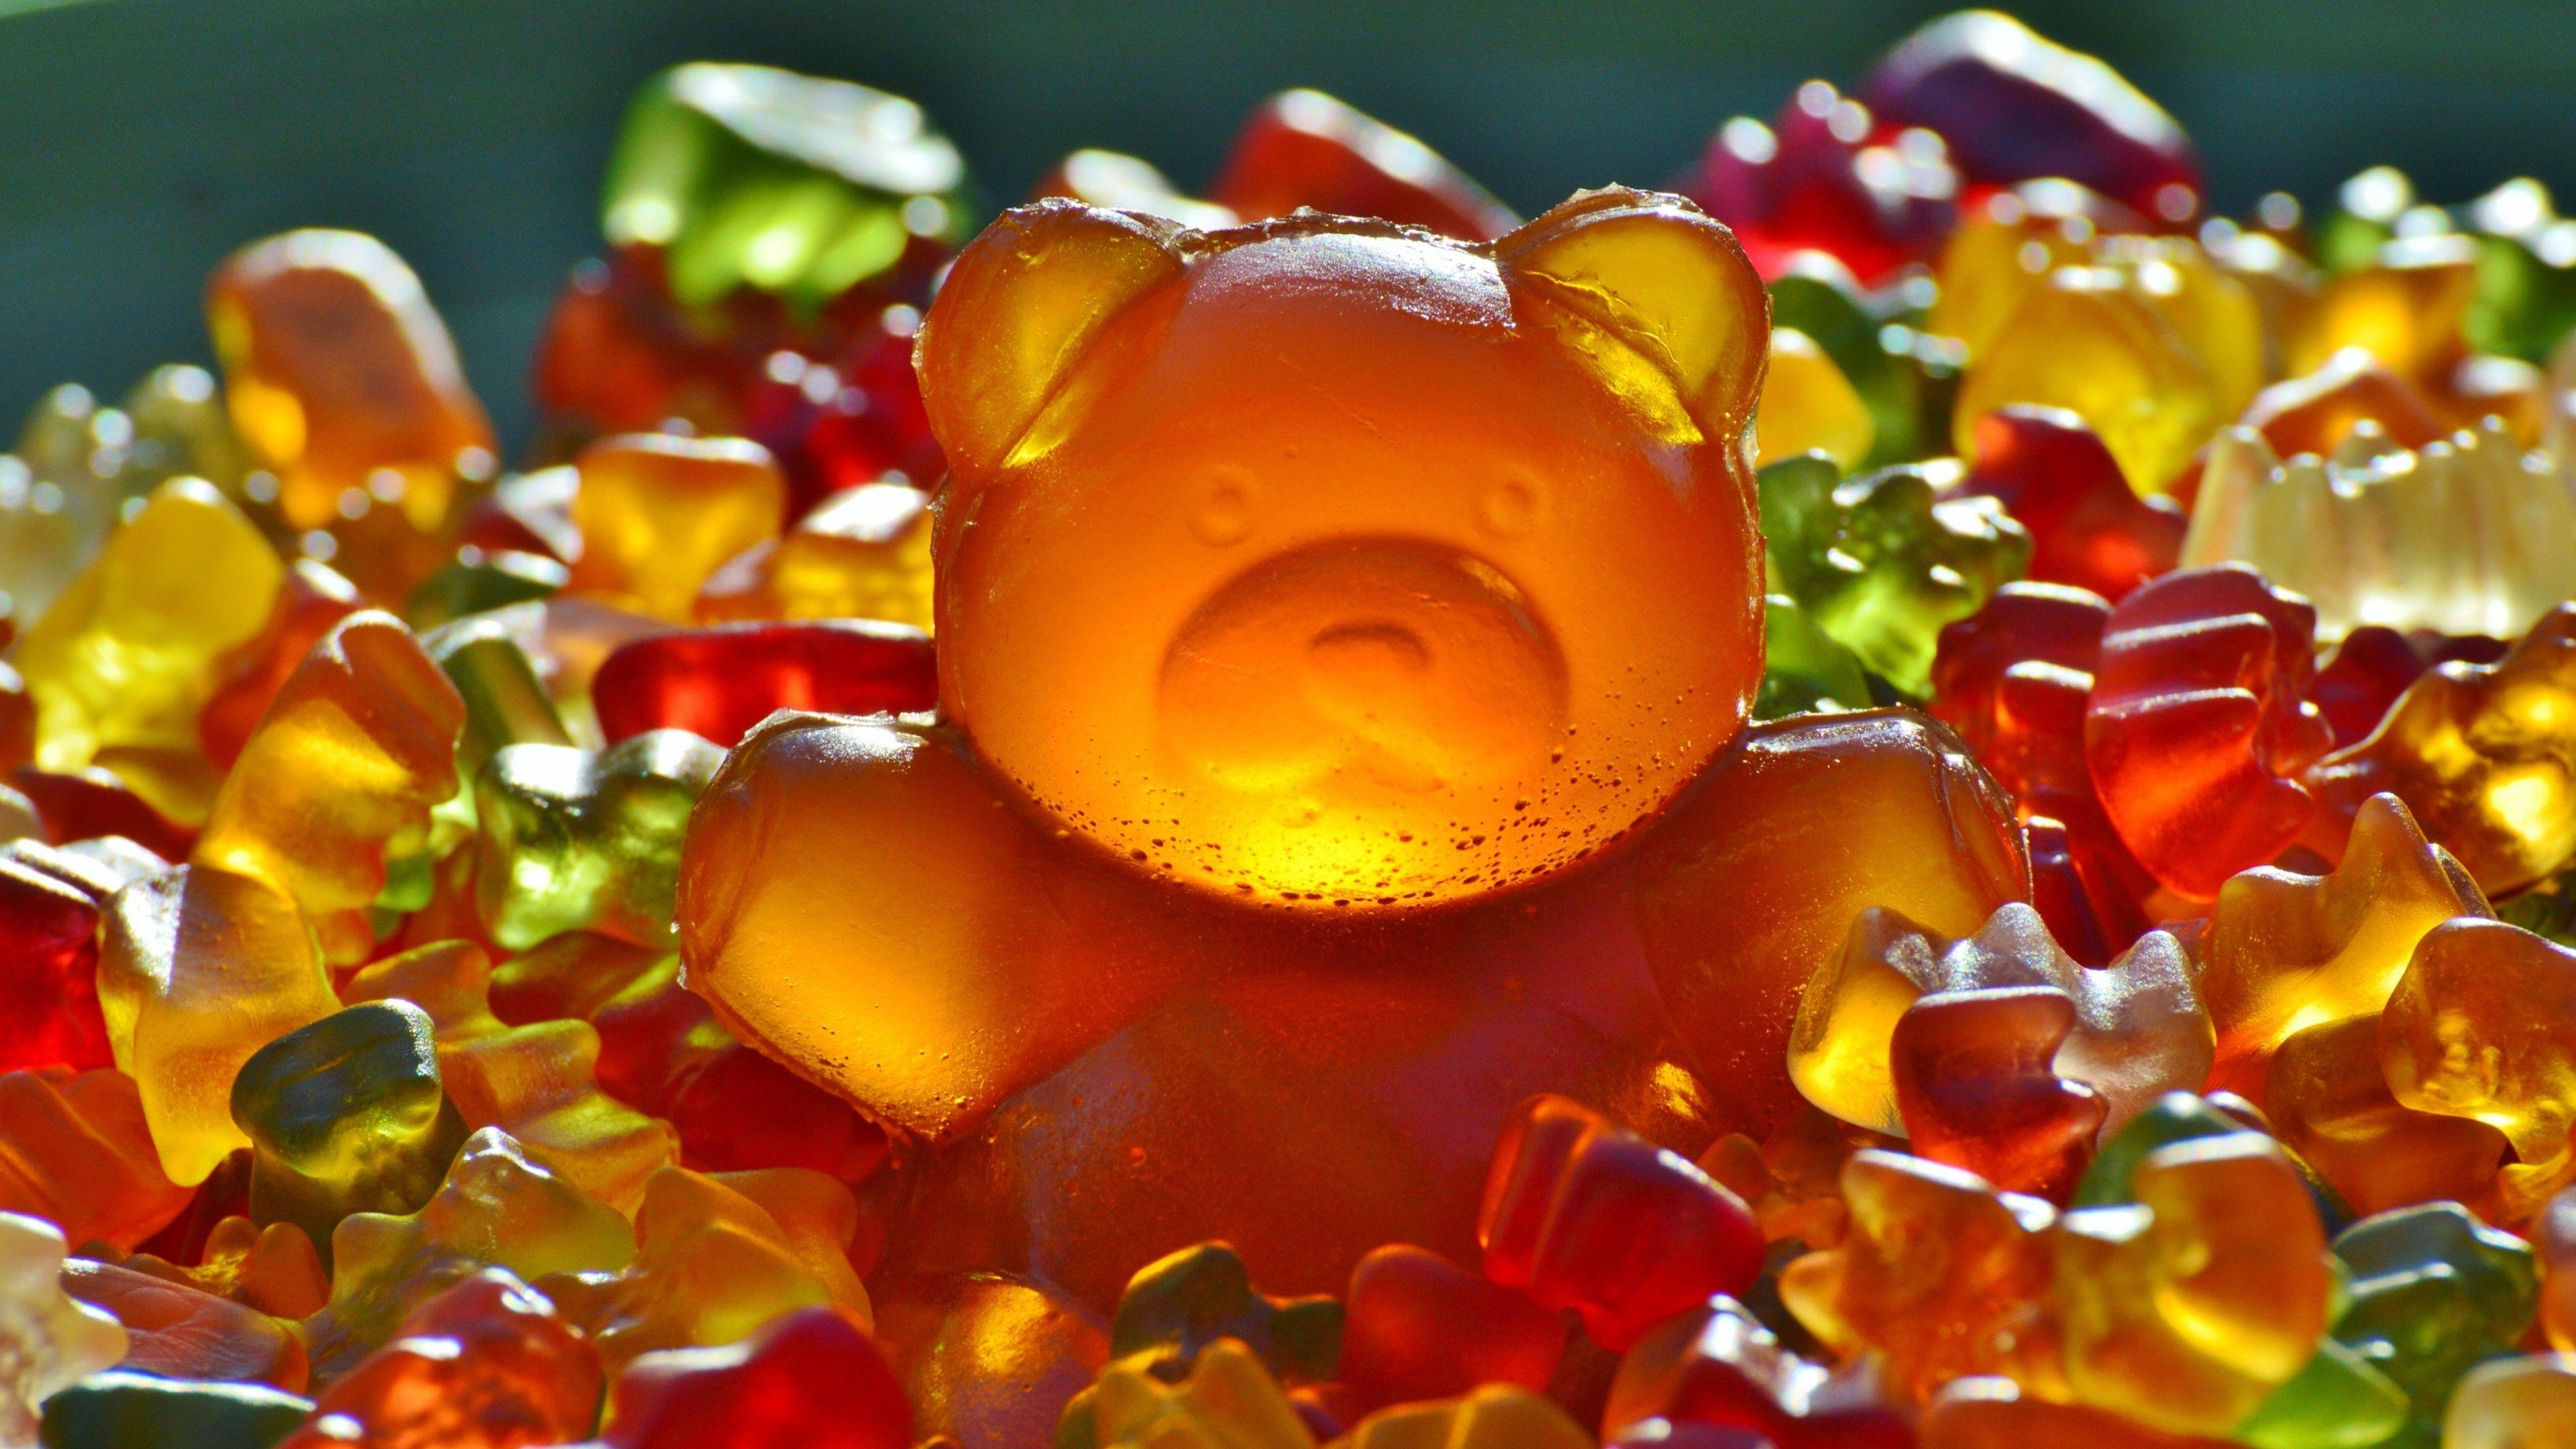 animals, Bears, Gummy Bears, Sweets, Candies, Colorful, Food